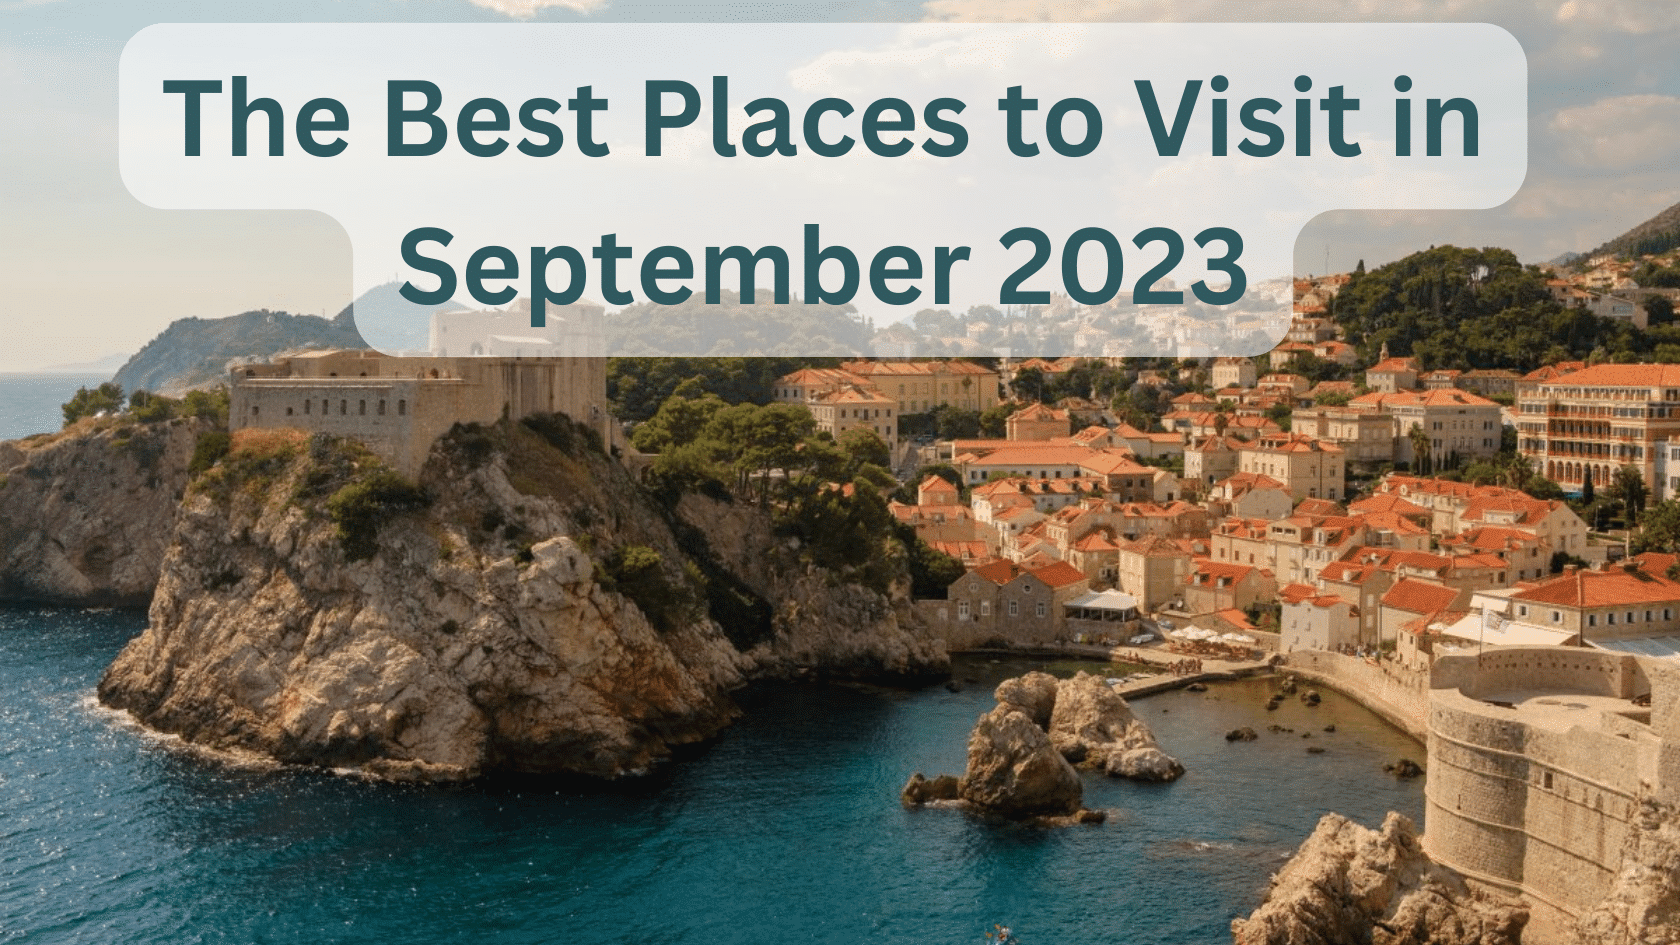 The Best Places to Visit in September 2023